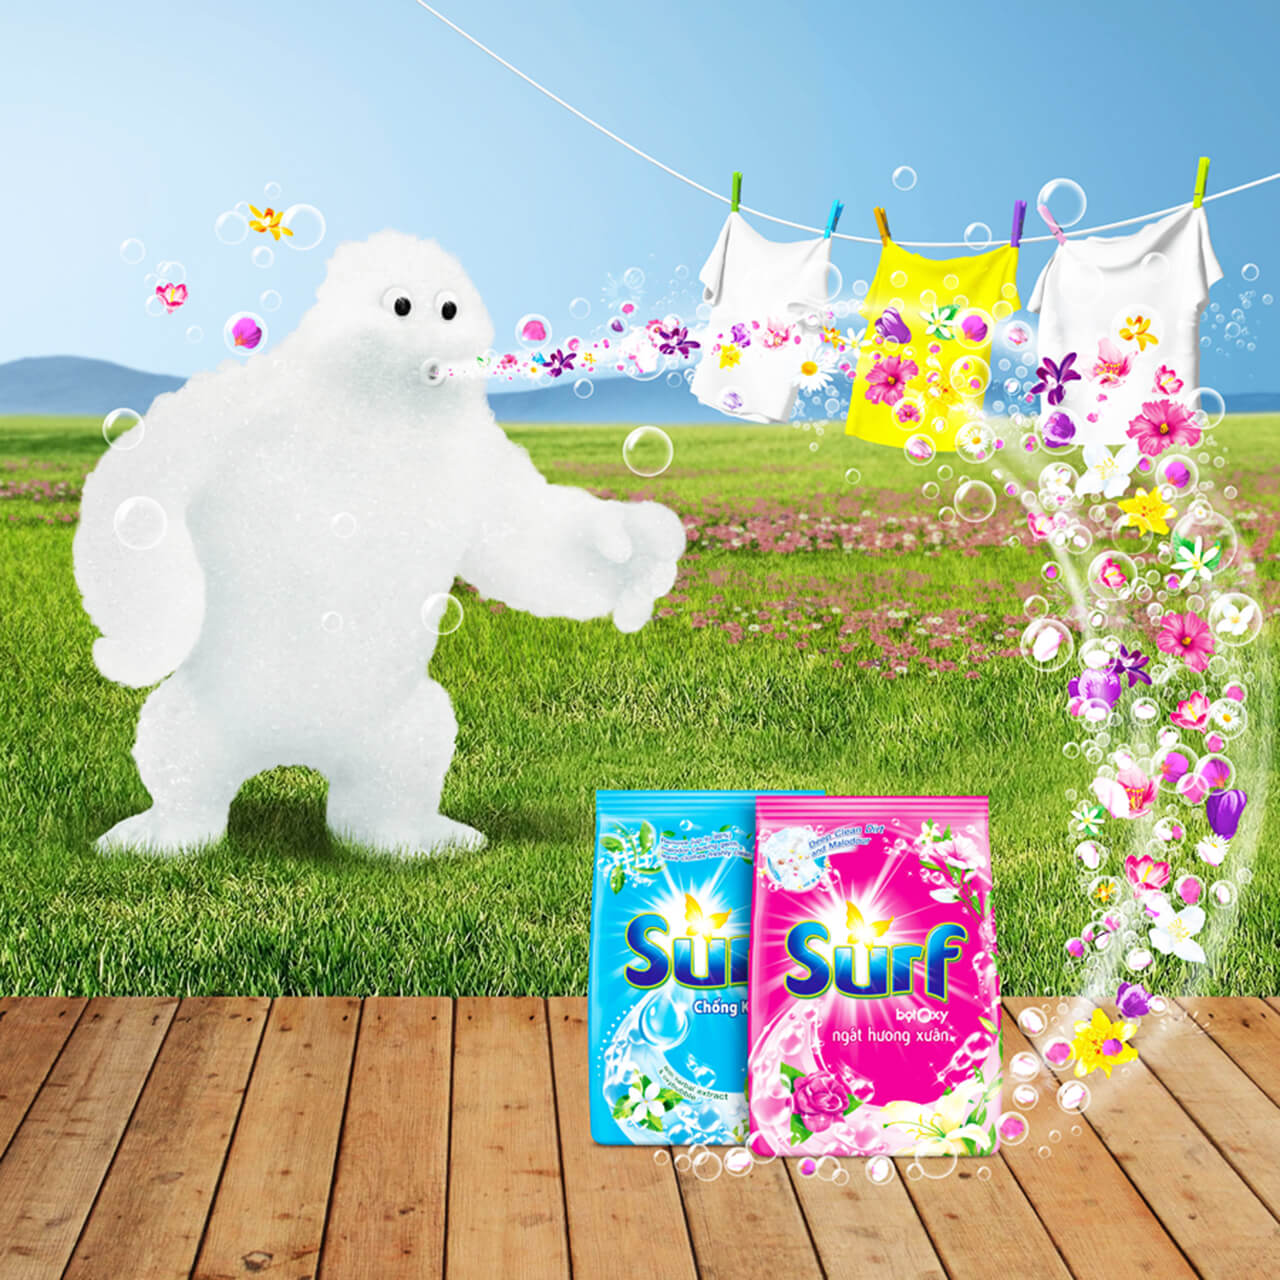 Computer Generated Image of a friendly monster made from foam blowing bubbles made of flowers into a pack of washing powder on a decked patio in a garden with washing hanging out to dry